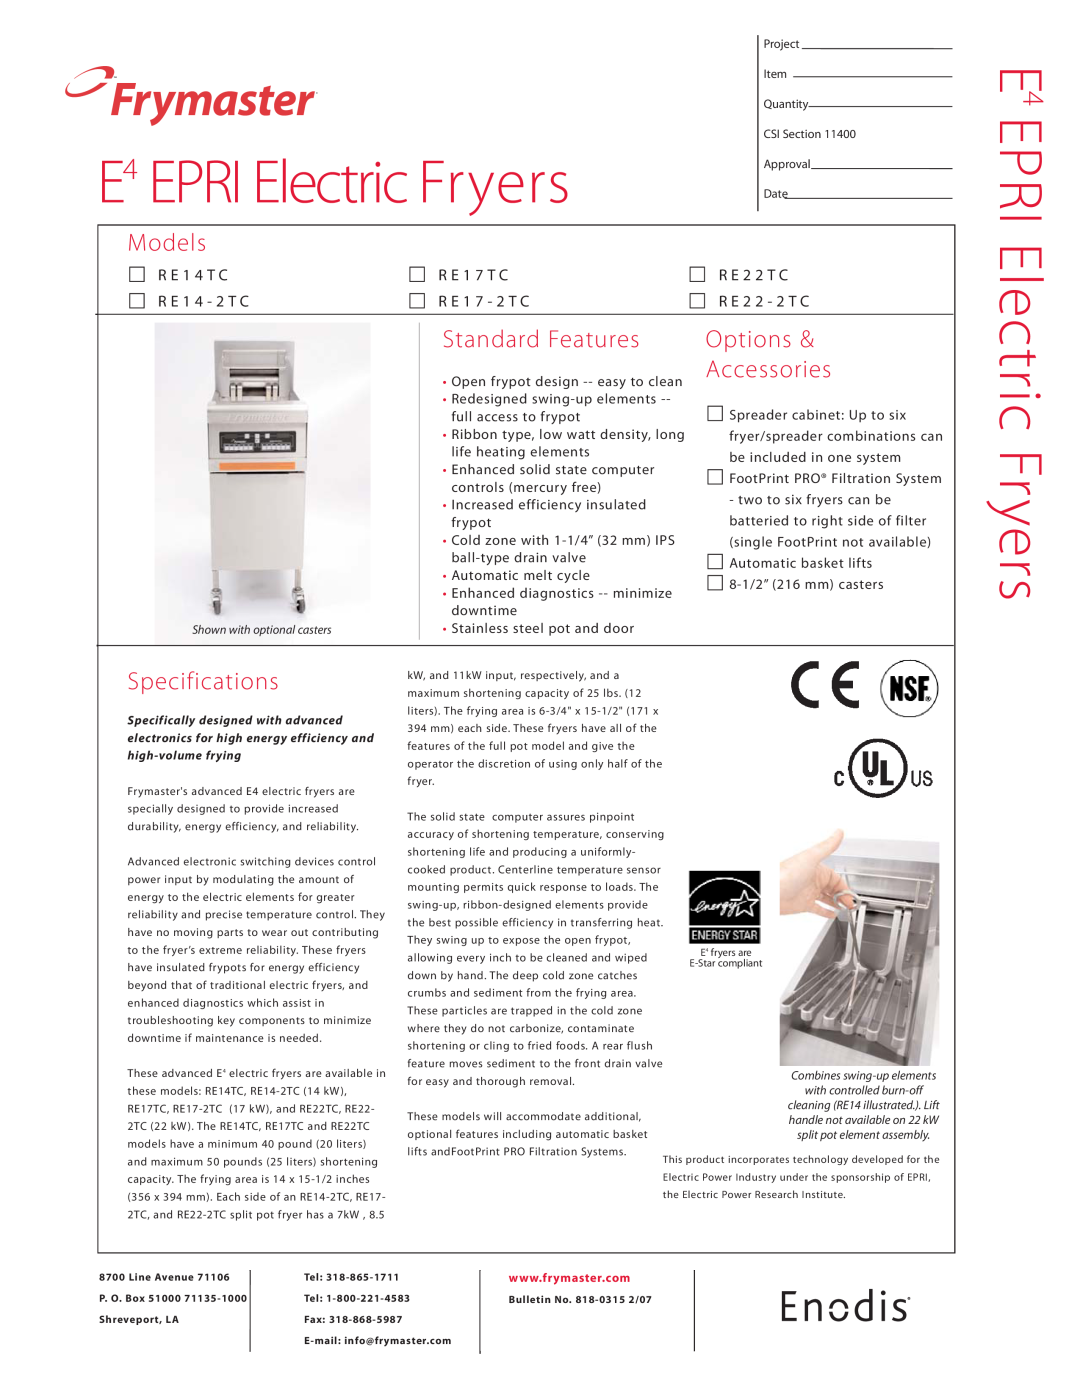 Frymaster RE17TC specifications Frymaster, E EPRI Electric Fryers, Models, Standard Features, Options & Accessories 